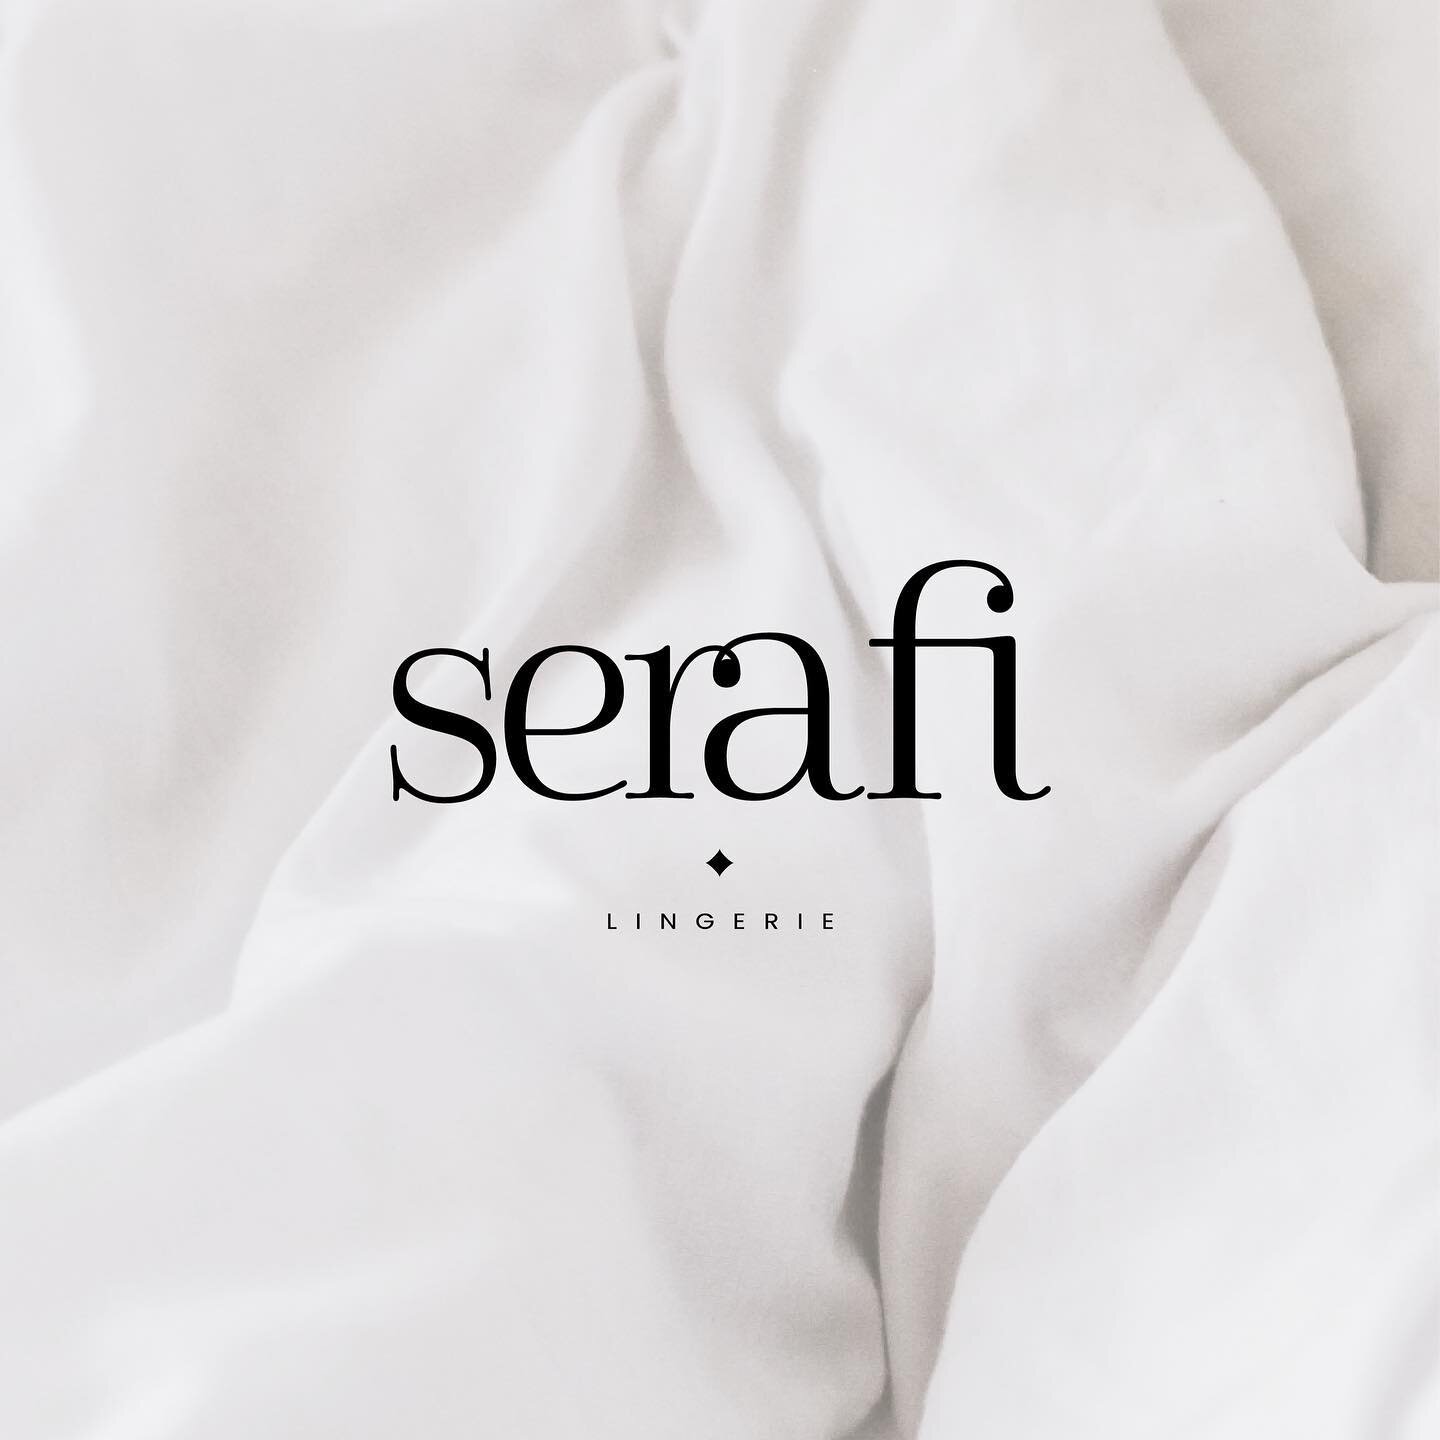 Introducing Serafi - a lingerie brand that believes every woman deserves to feel confident and beautiful in their own skin. 

Their mission is to empower women to look and feel their best every day, by creating comfortable, high-quality lingerie that